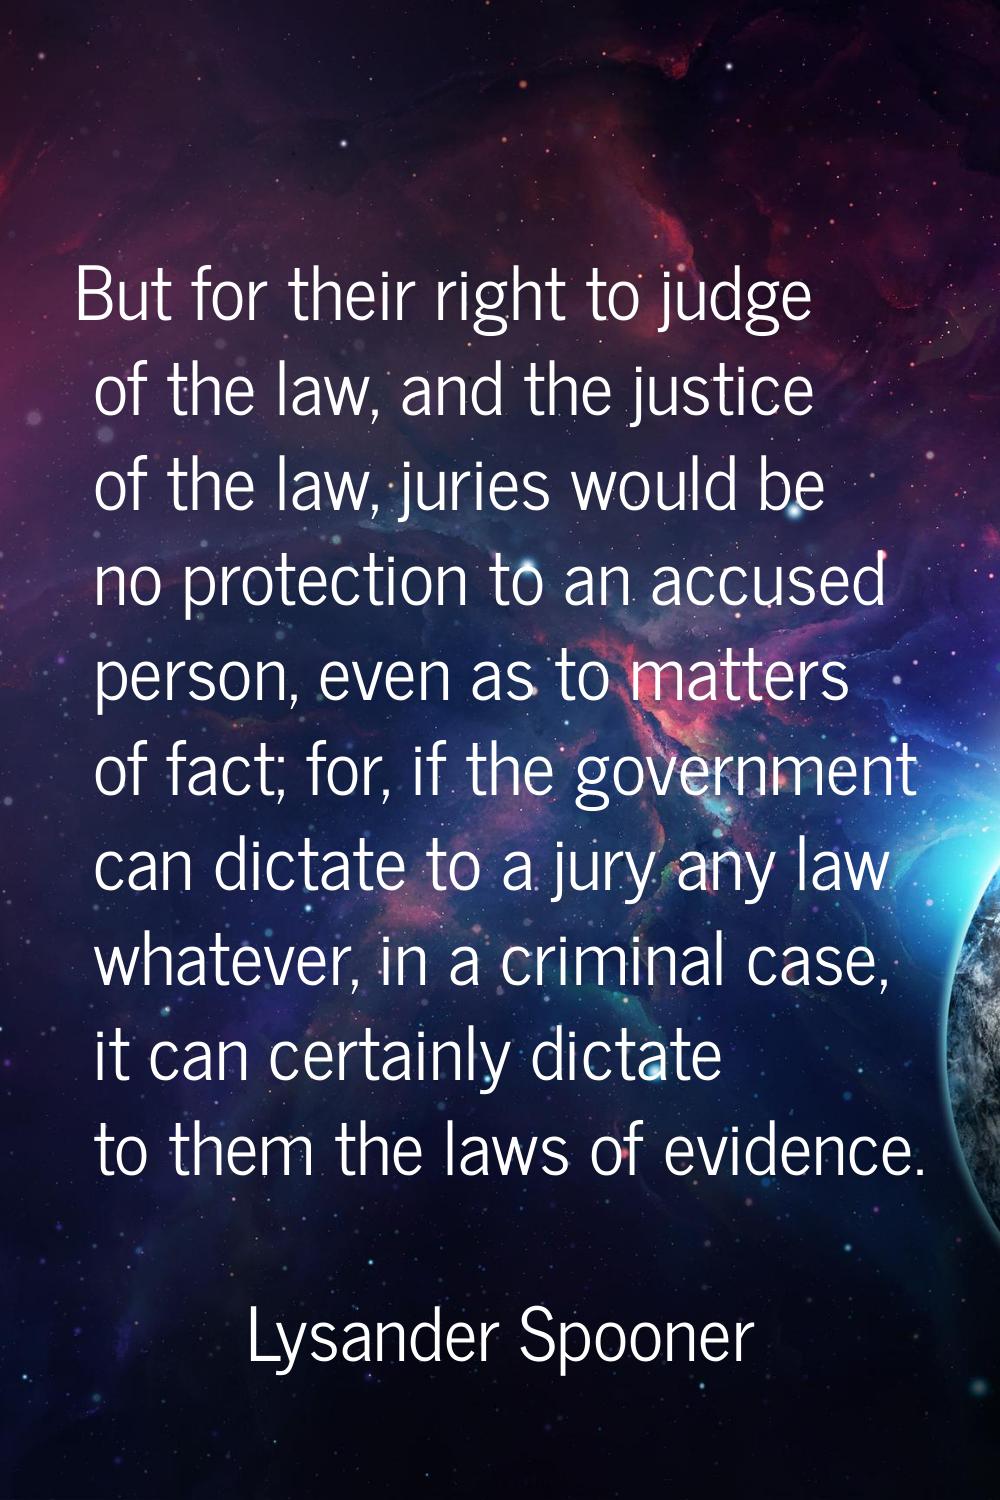 But for their right to judge of the law, and the justice of the law, juries would be no protection 